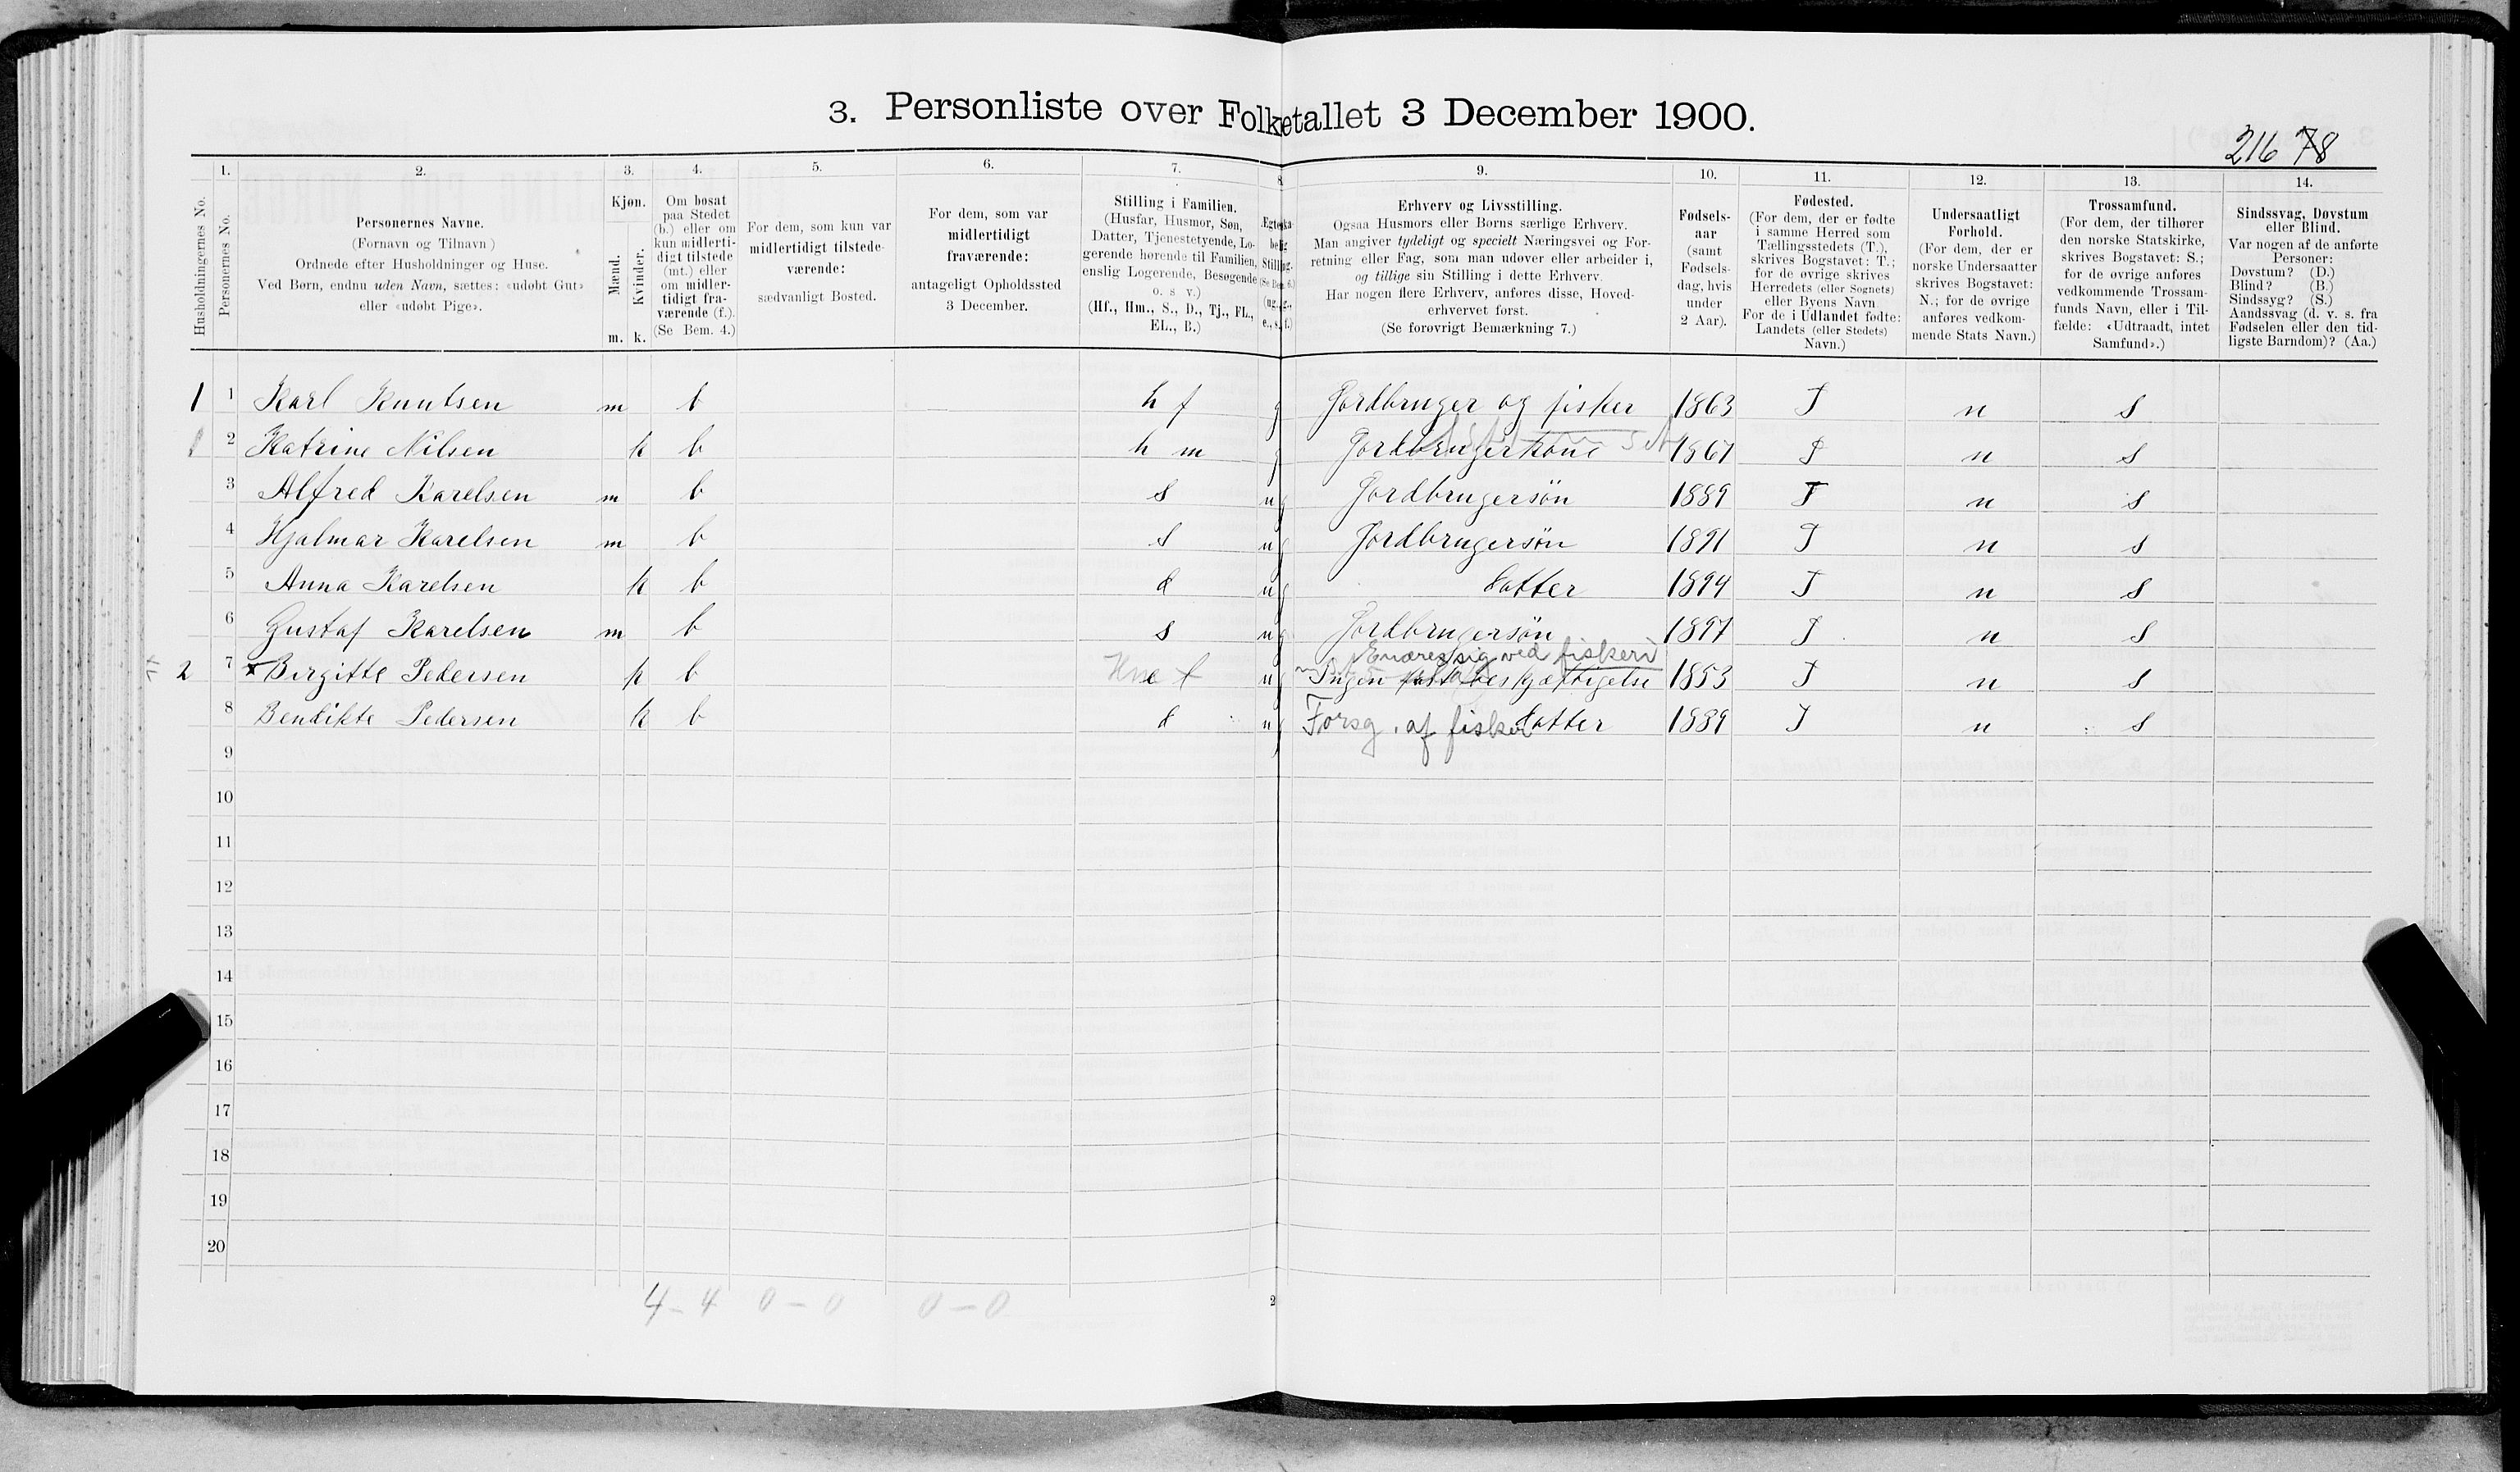 SAT, 1900 census for Tysfjord, 1900, p. 229